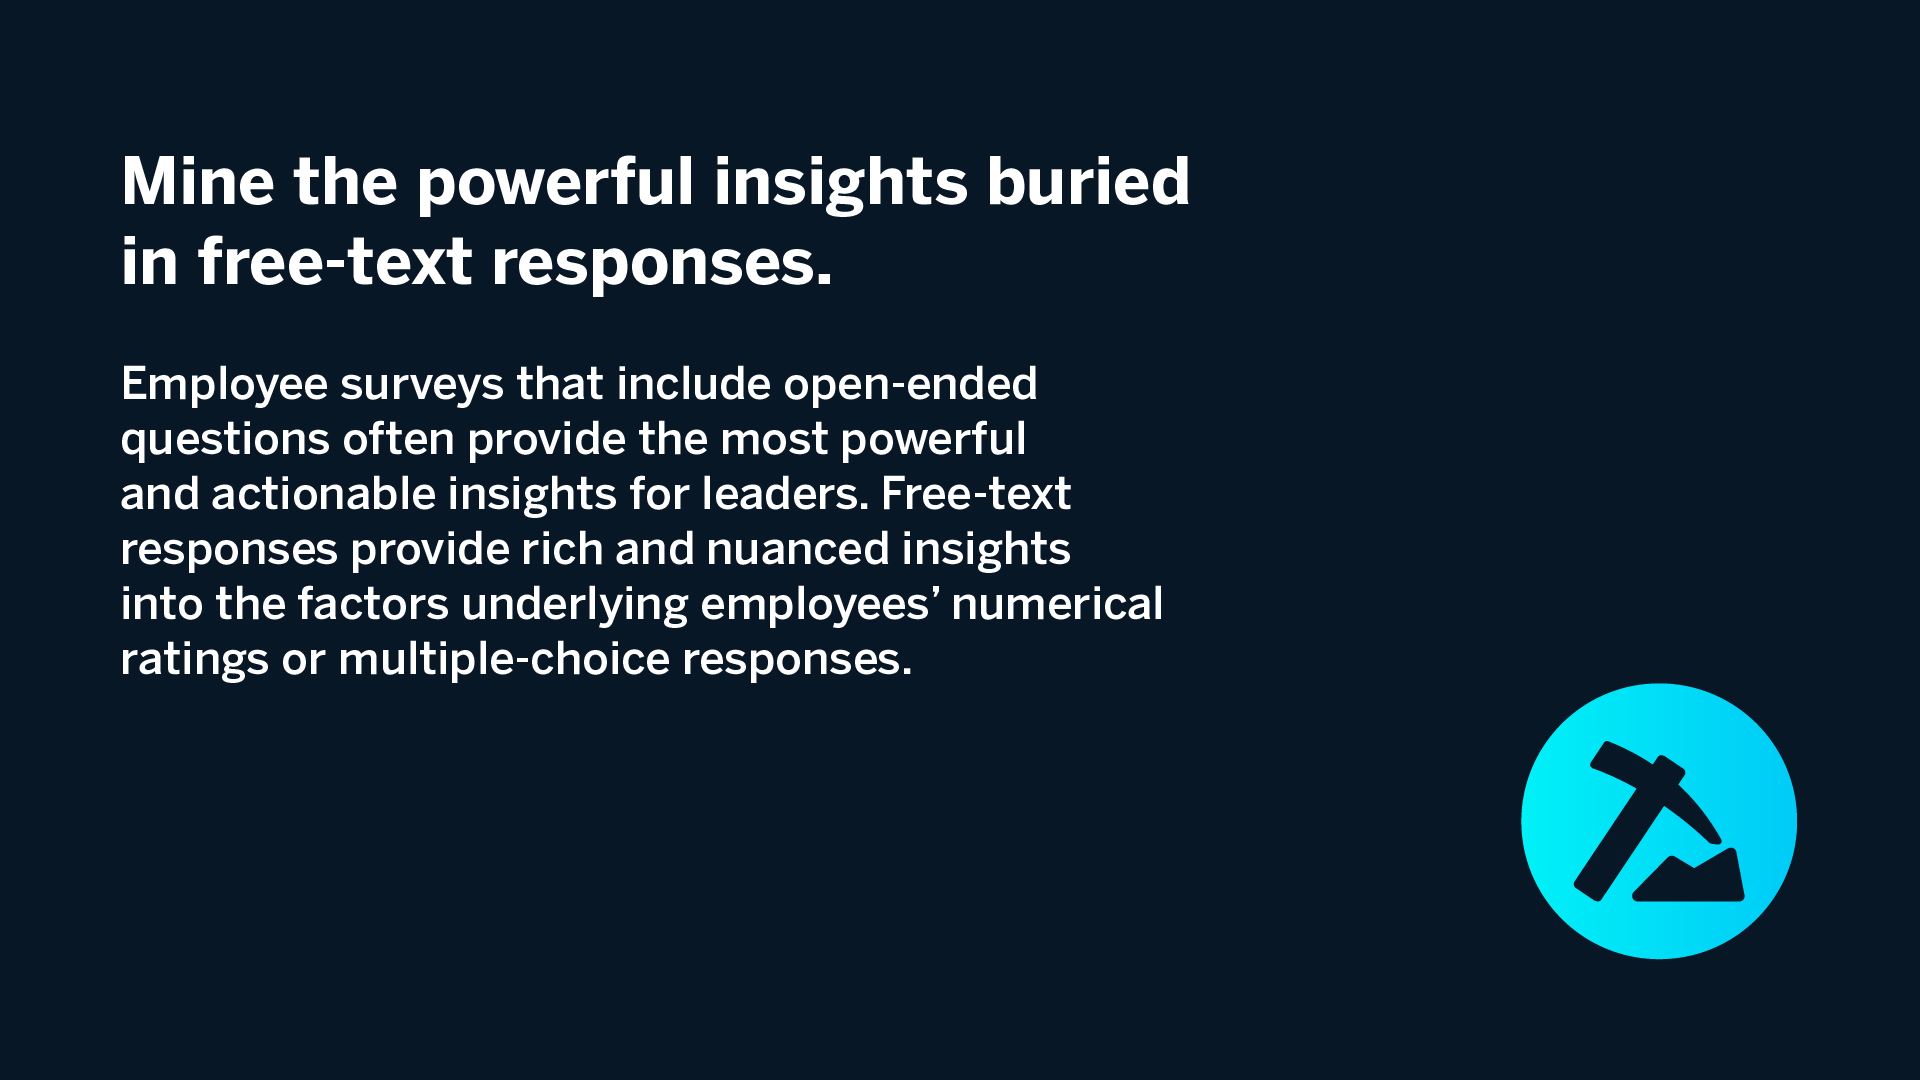 Mine the powerful insights buried in free-text responses. Employee surveys that include open-ended questions often provide the most powerful and actionable insights for leaders. Free-text responses provide rich and nuanced insights into the factors underlying employees’ numerical ratings or multiple-choice responses.